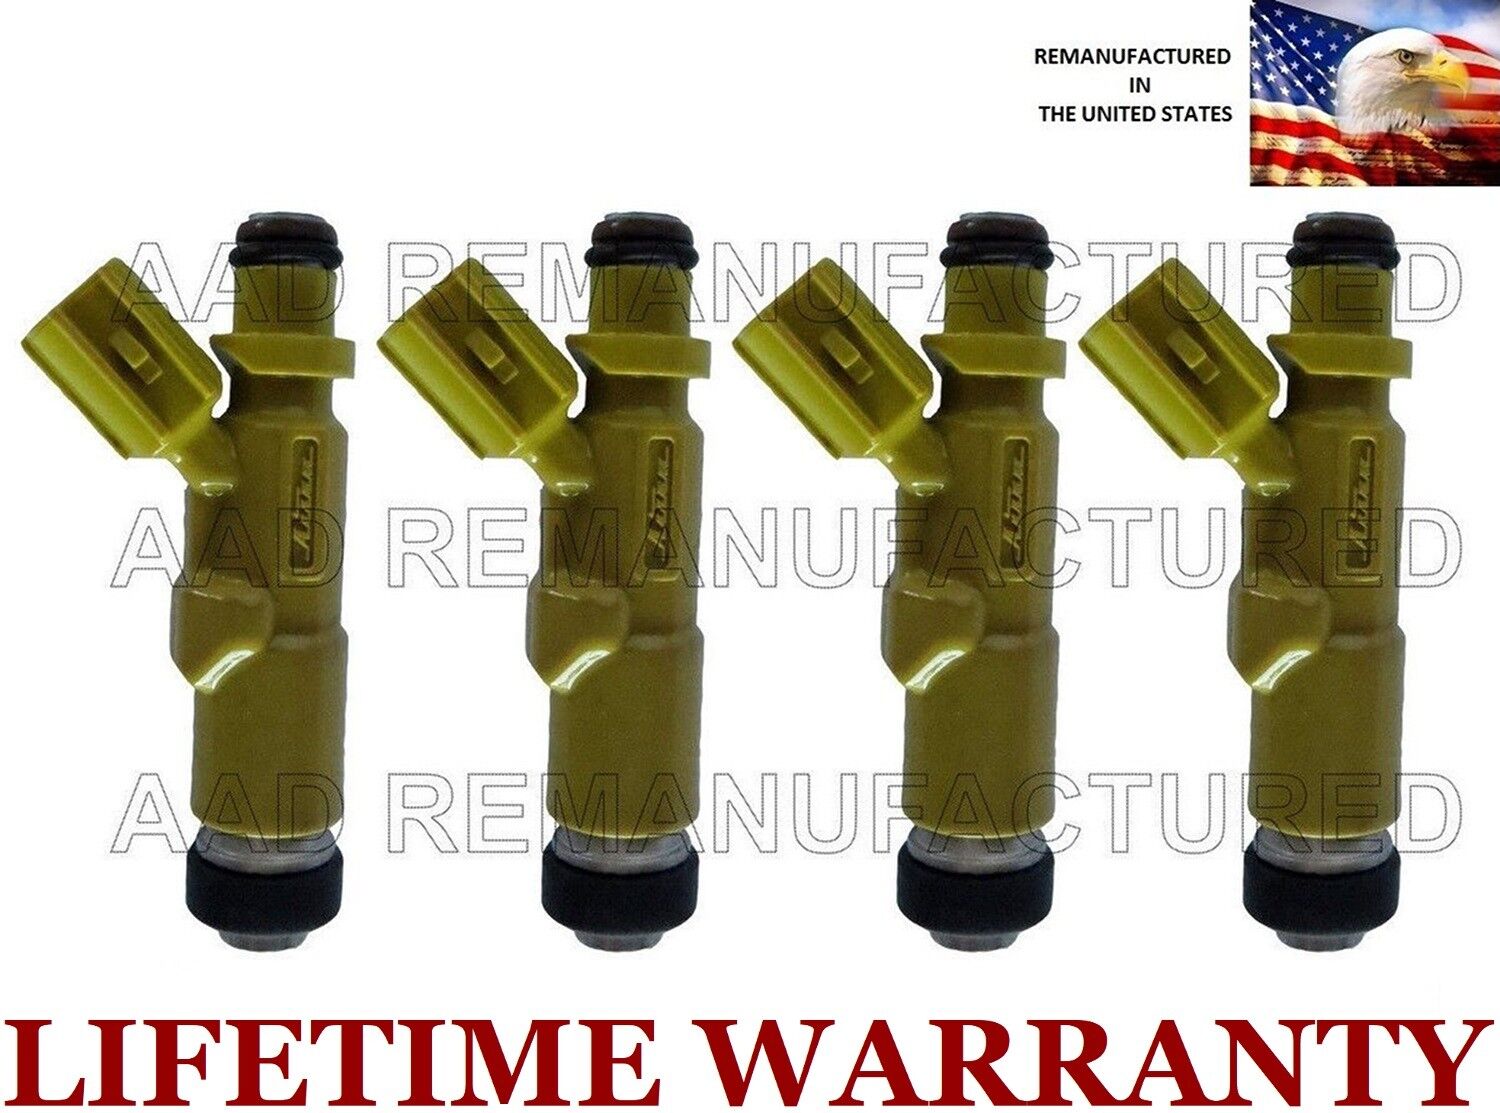 OEM set of 4 Genuine Toyota Fuel Injectors for Toyota Celica GTS 1.8L 2ZZGE